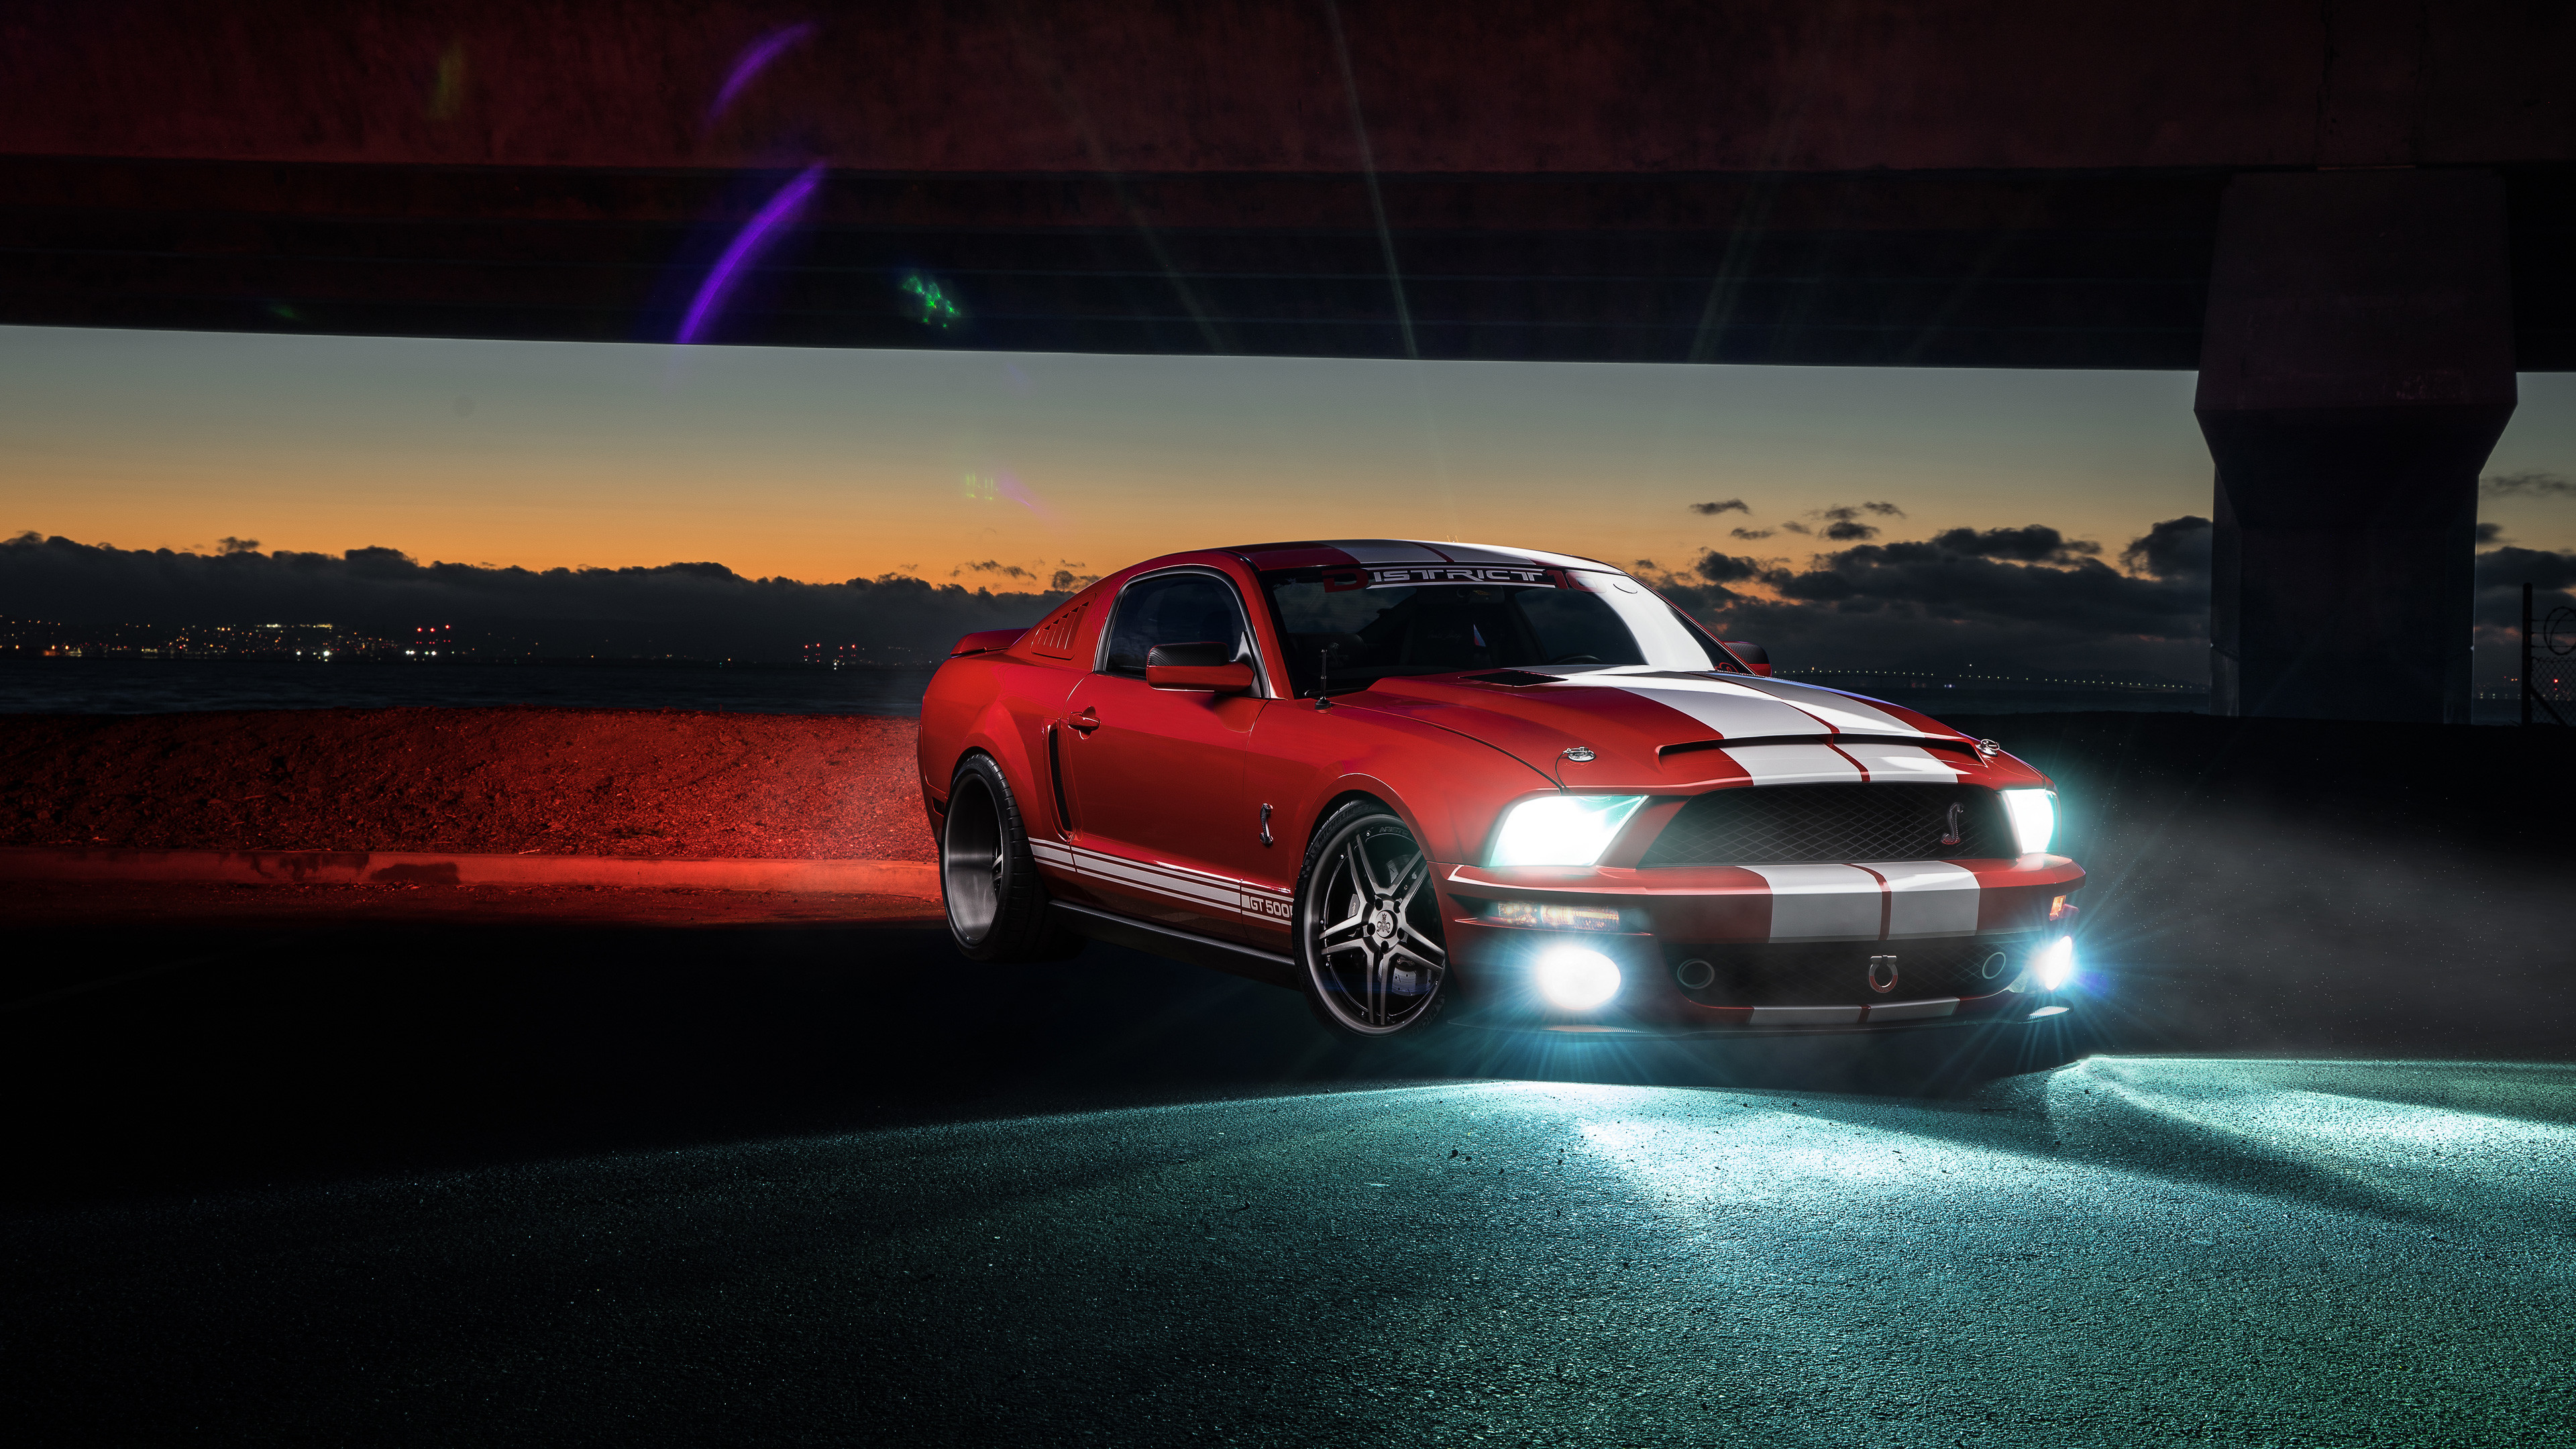 3840x2160 Ford Mustang Shelby Wallpaper